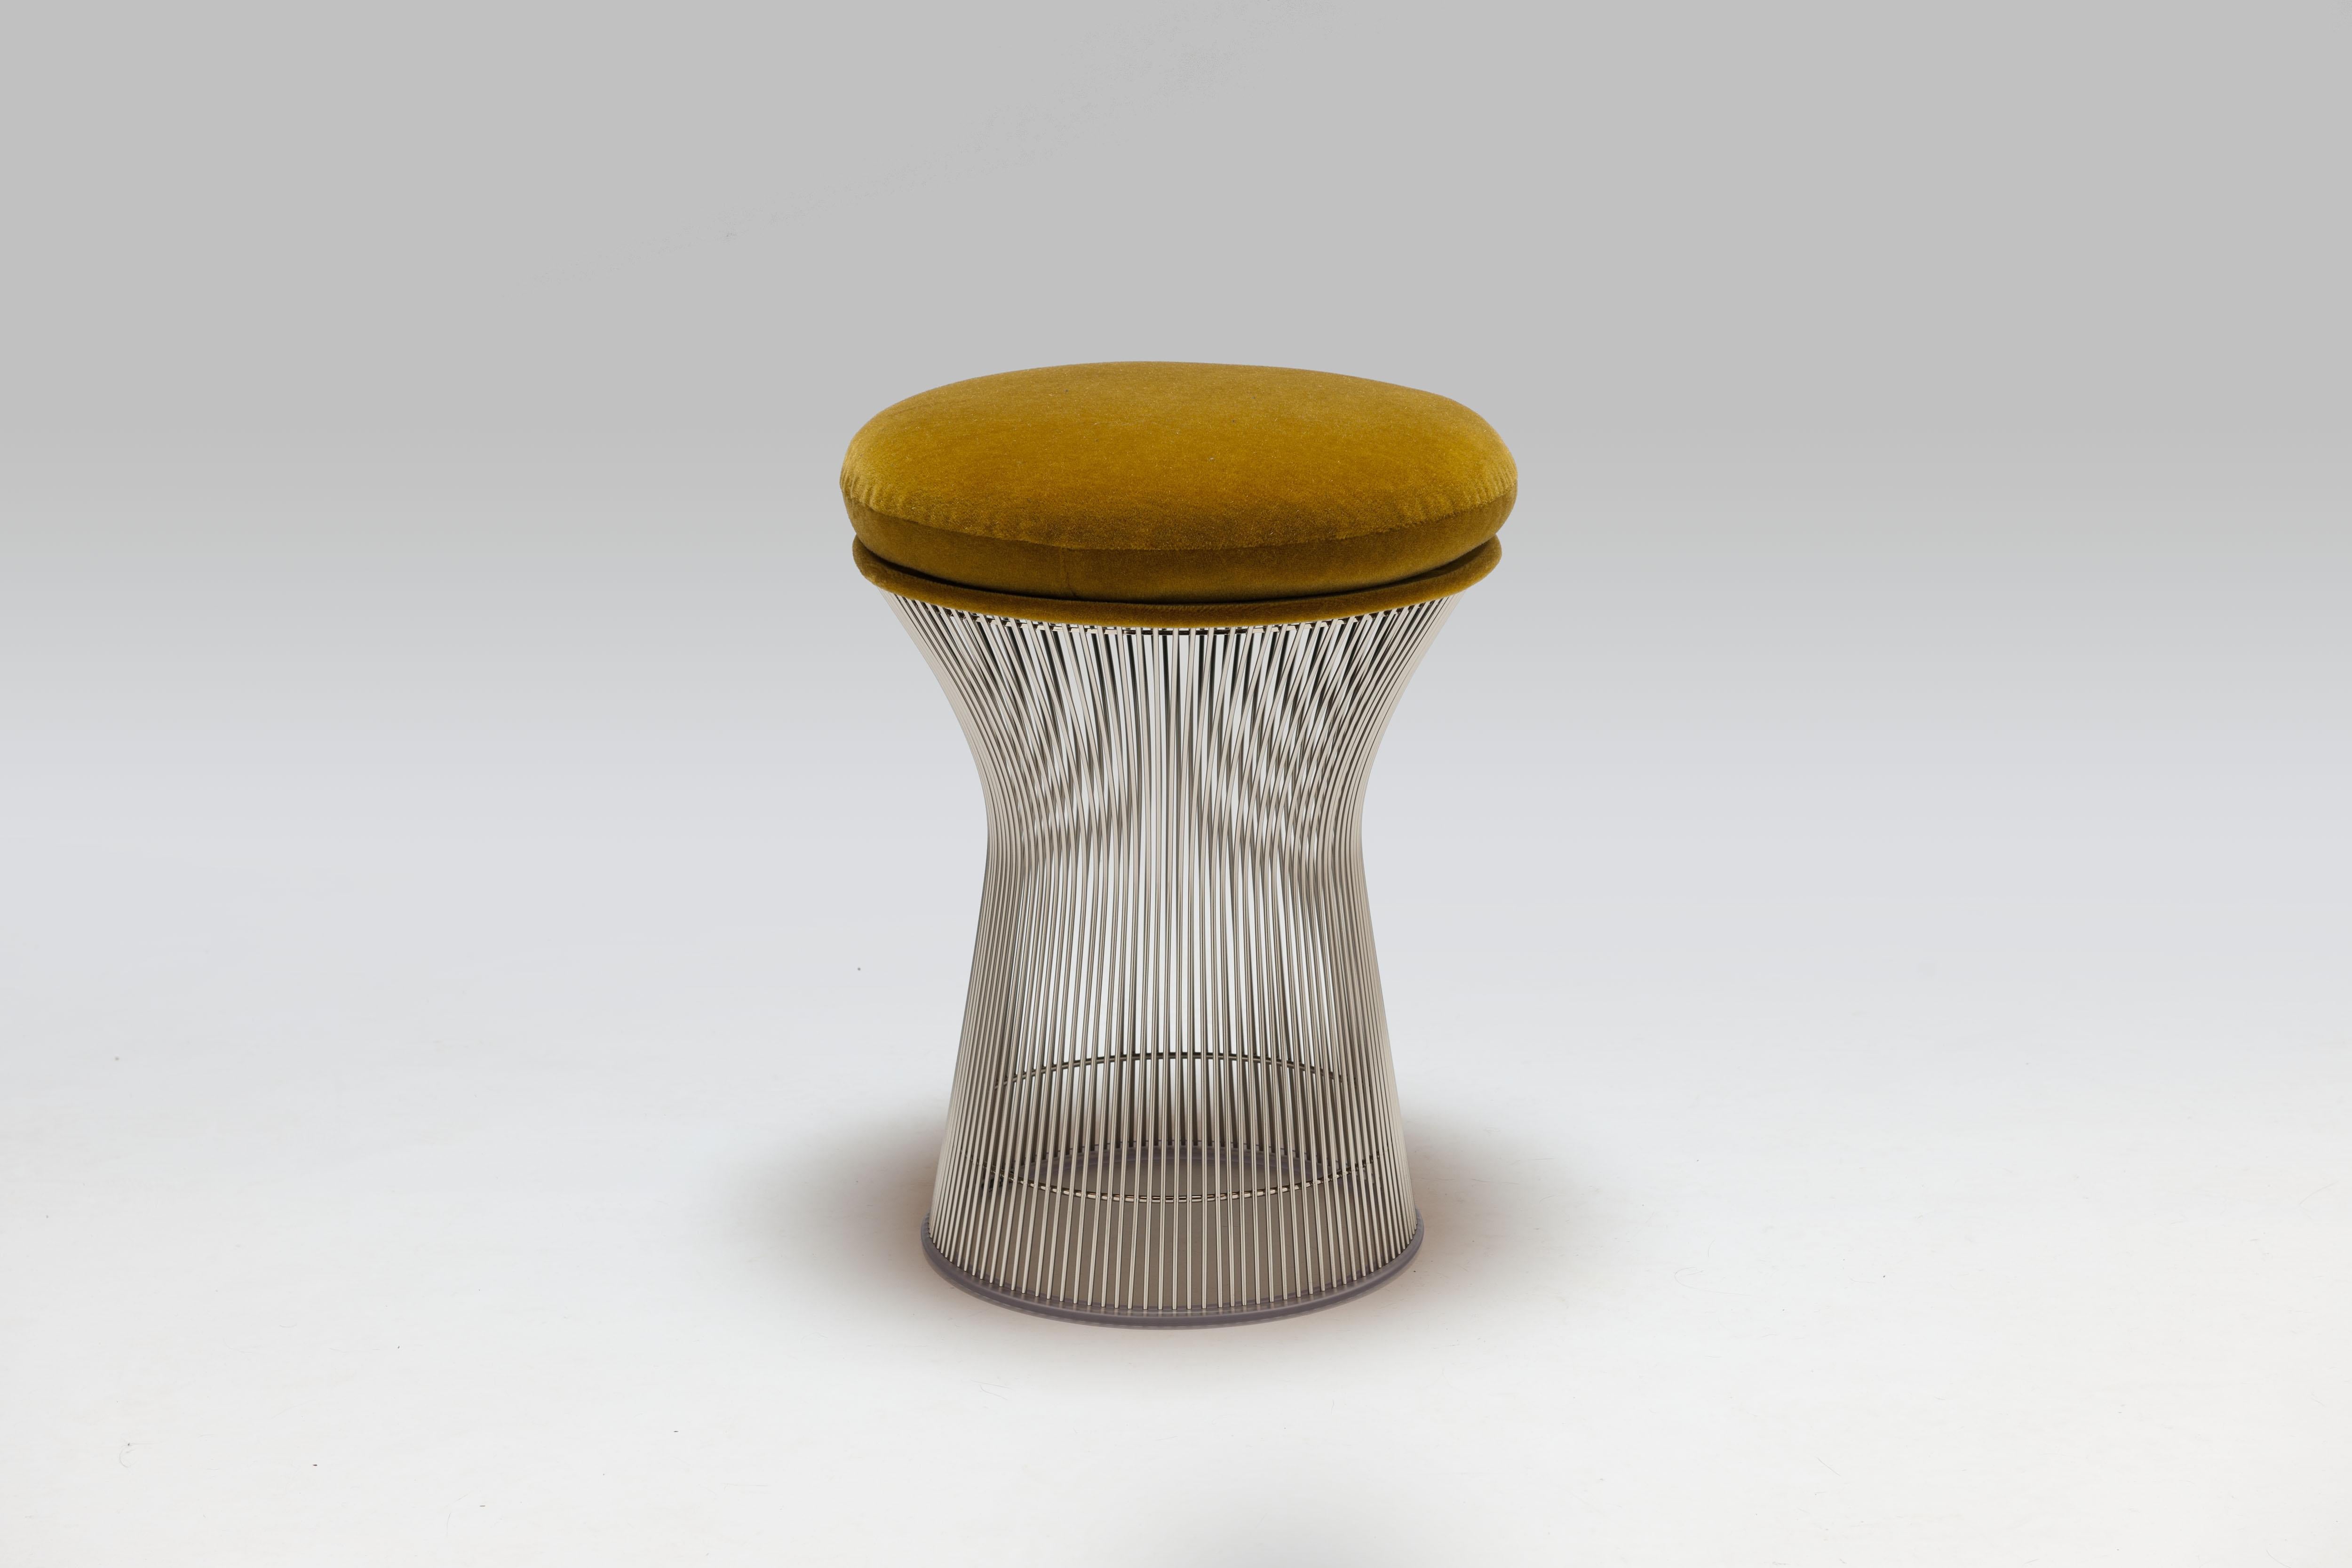 High model stool from the 'Wire series' by American designer Warren Platner for Knoll International in nickel execution with a chartreuse green mohair velour Knoll fabrics upholstery.
Stool is new and comes in pristine condition inclusive Knoll